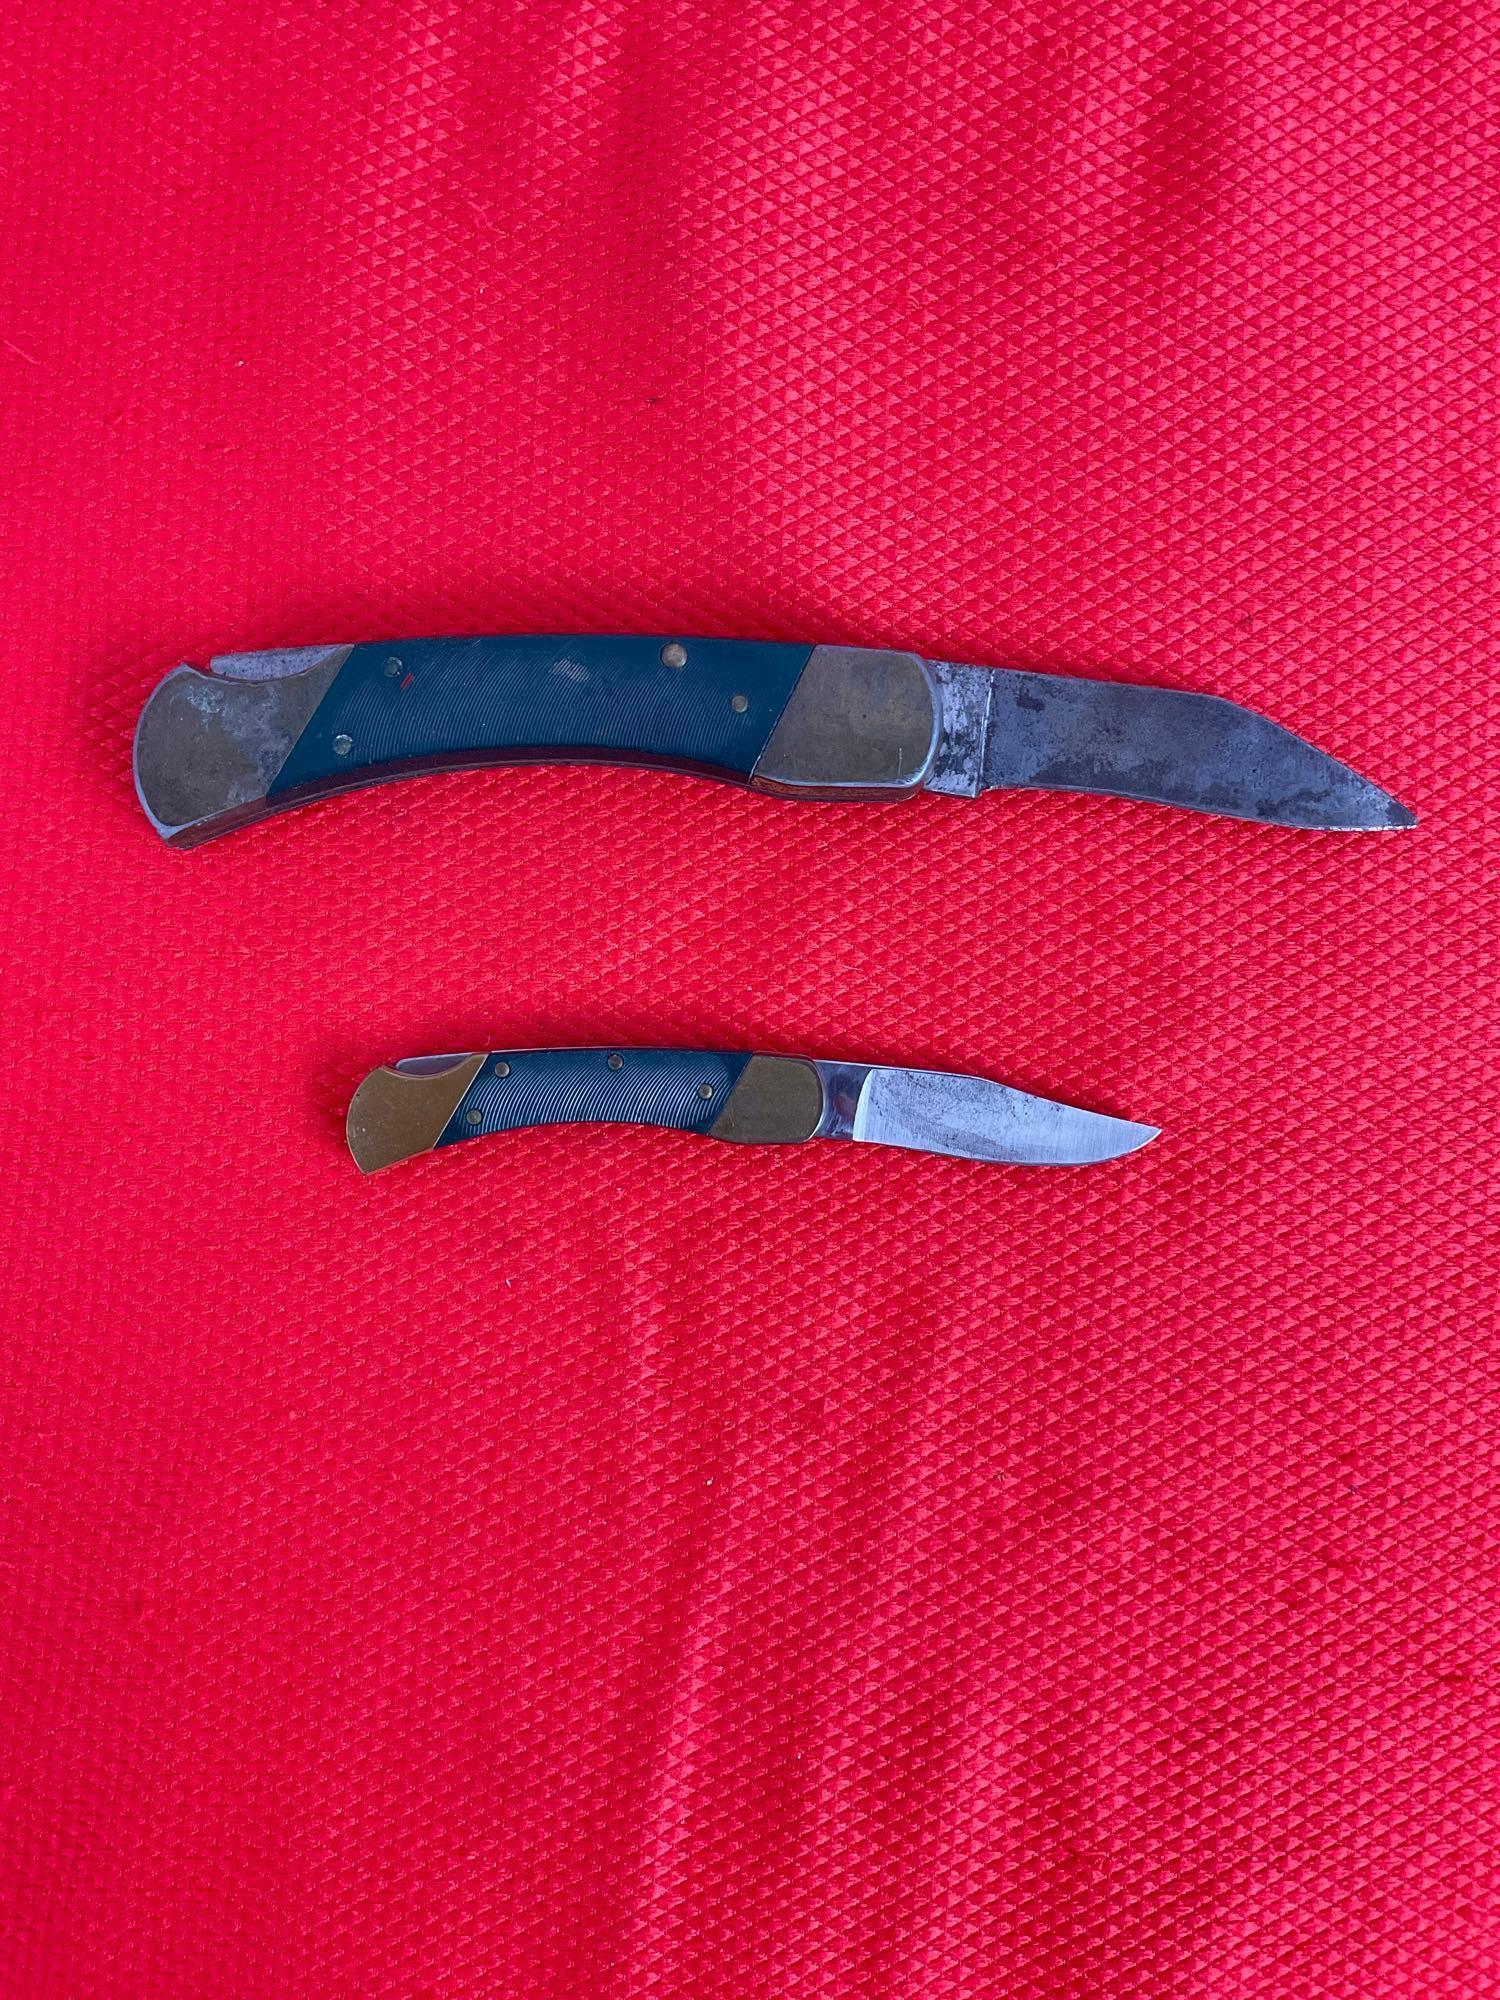 2 pcs Vintage Coyote Steel Folding Knives. 2.5" & 3.5" Blades w/ Brass & Composite Handles. See